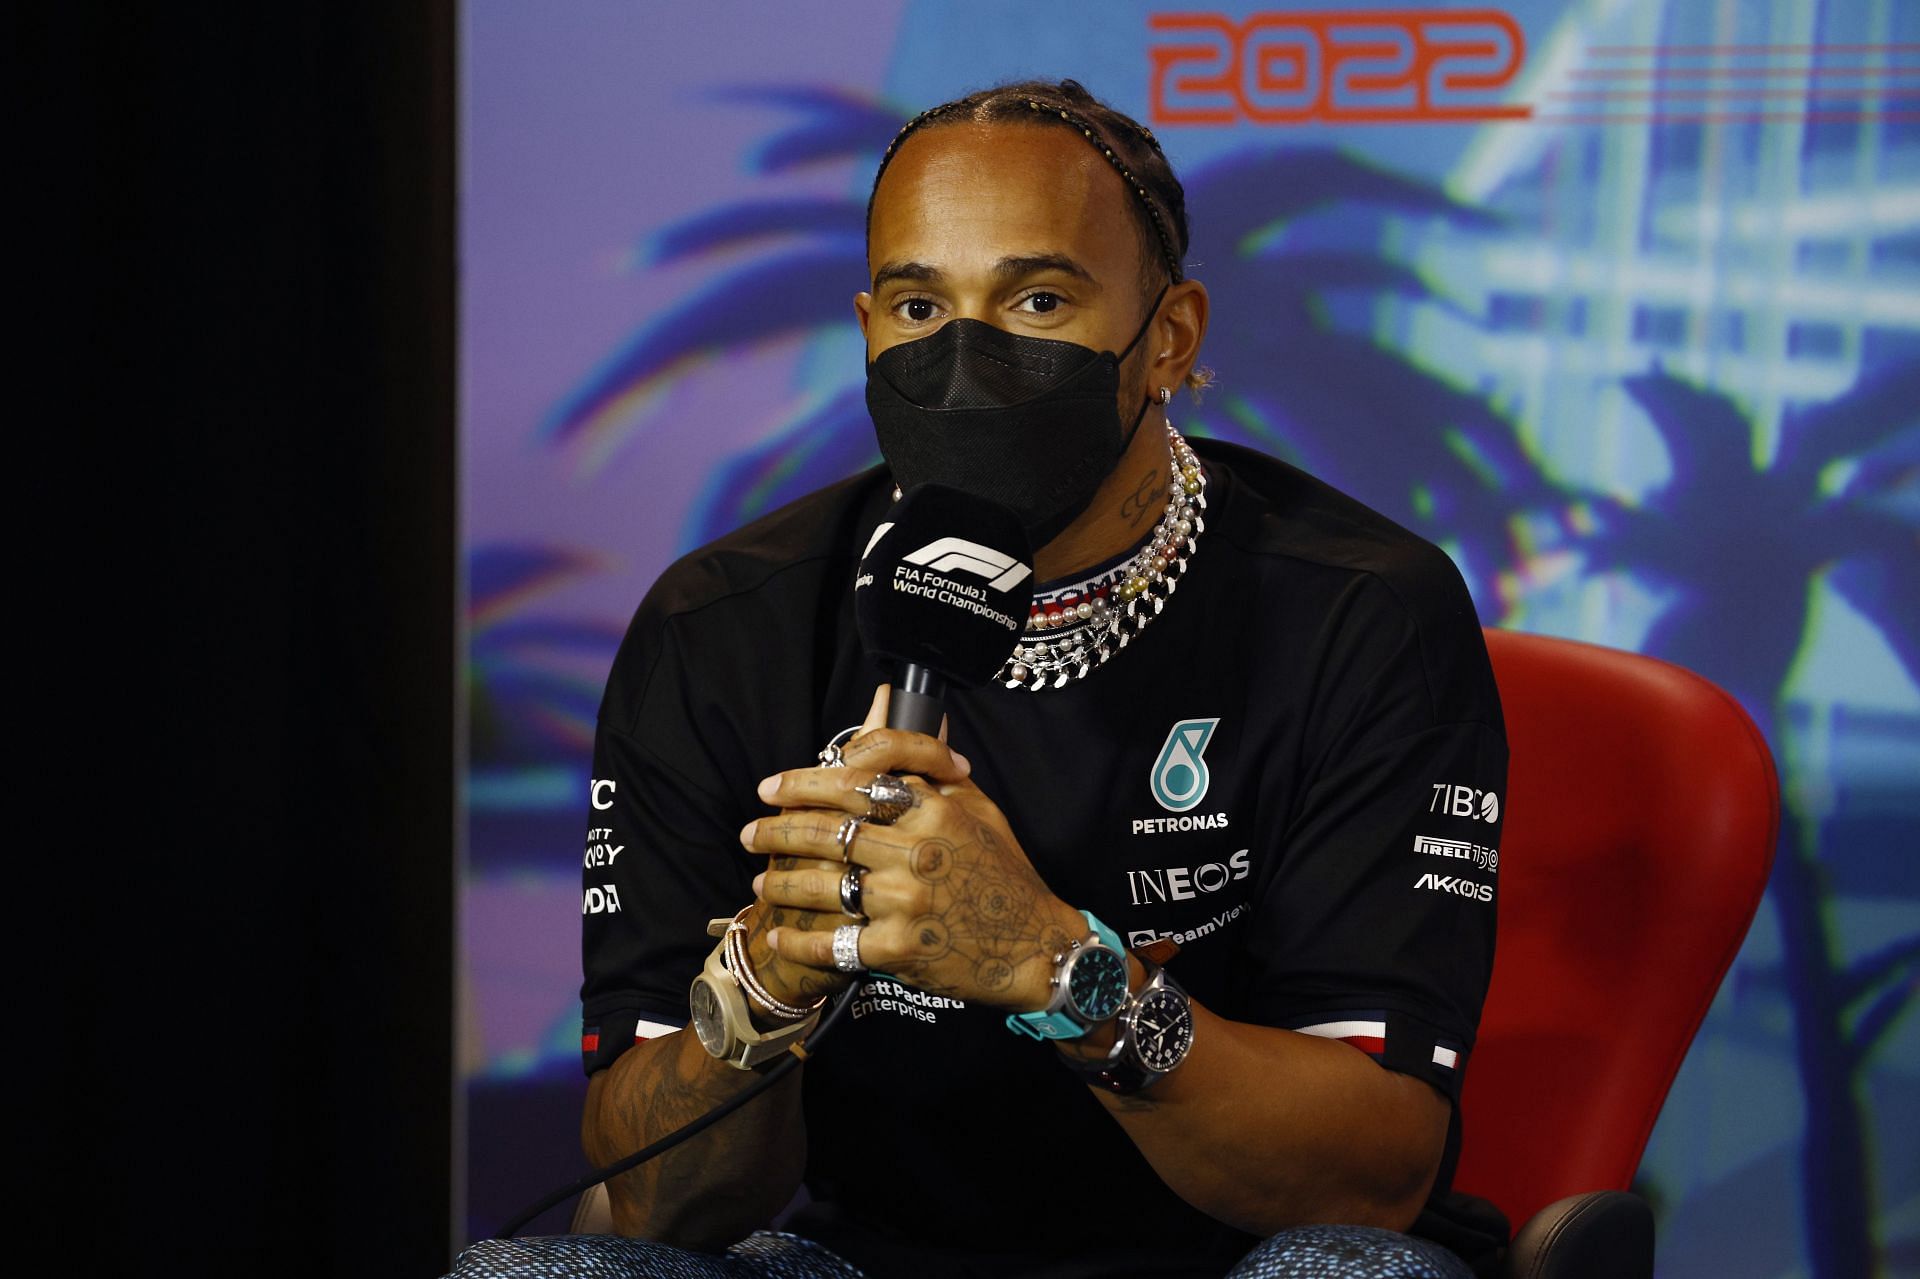 Lewis Hamilton has said he does not plan to compy with the FIA&#039;s jewelry ban during F1 races. (Photo by Jared C. Tilton/Getty Images)